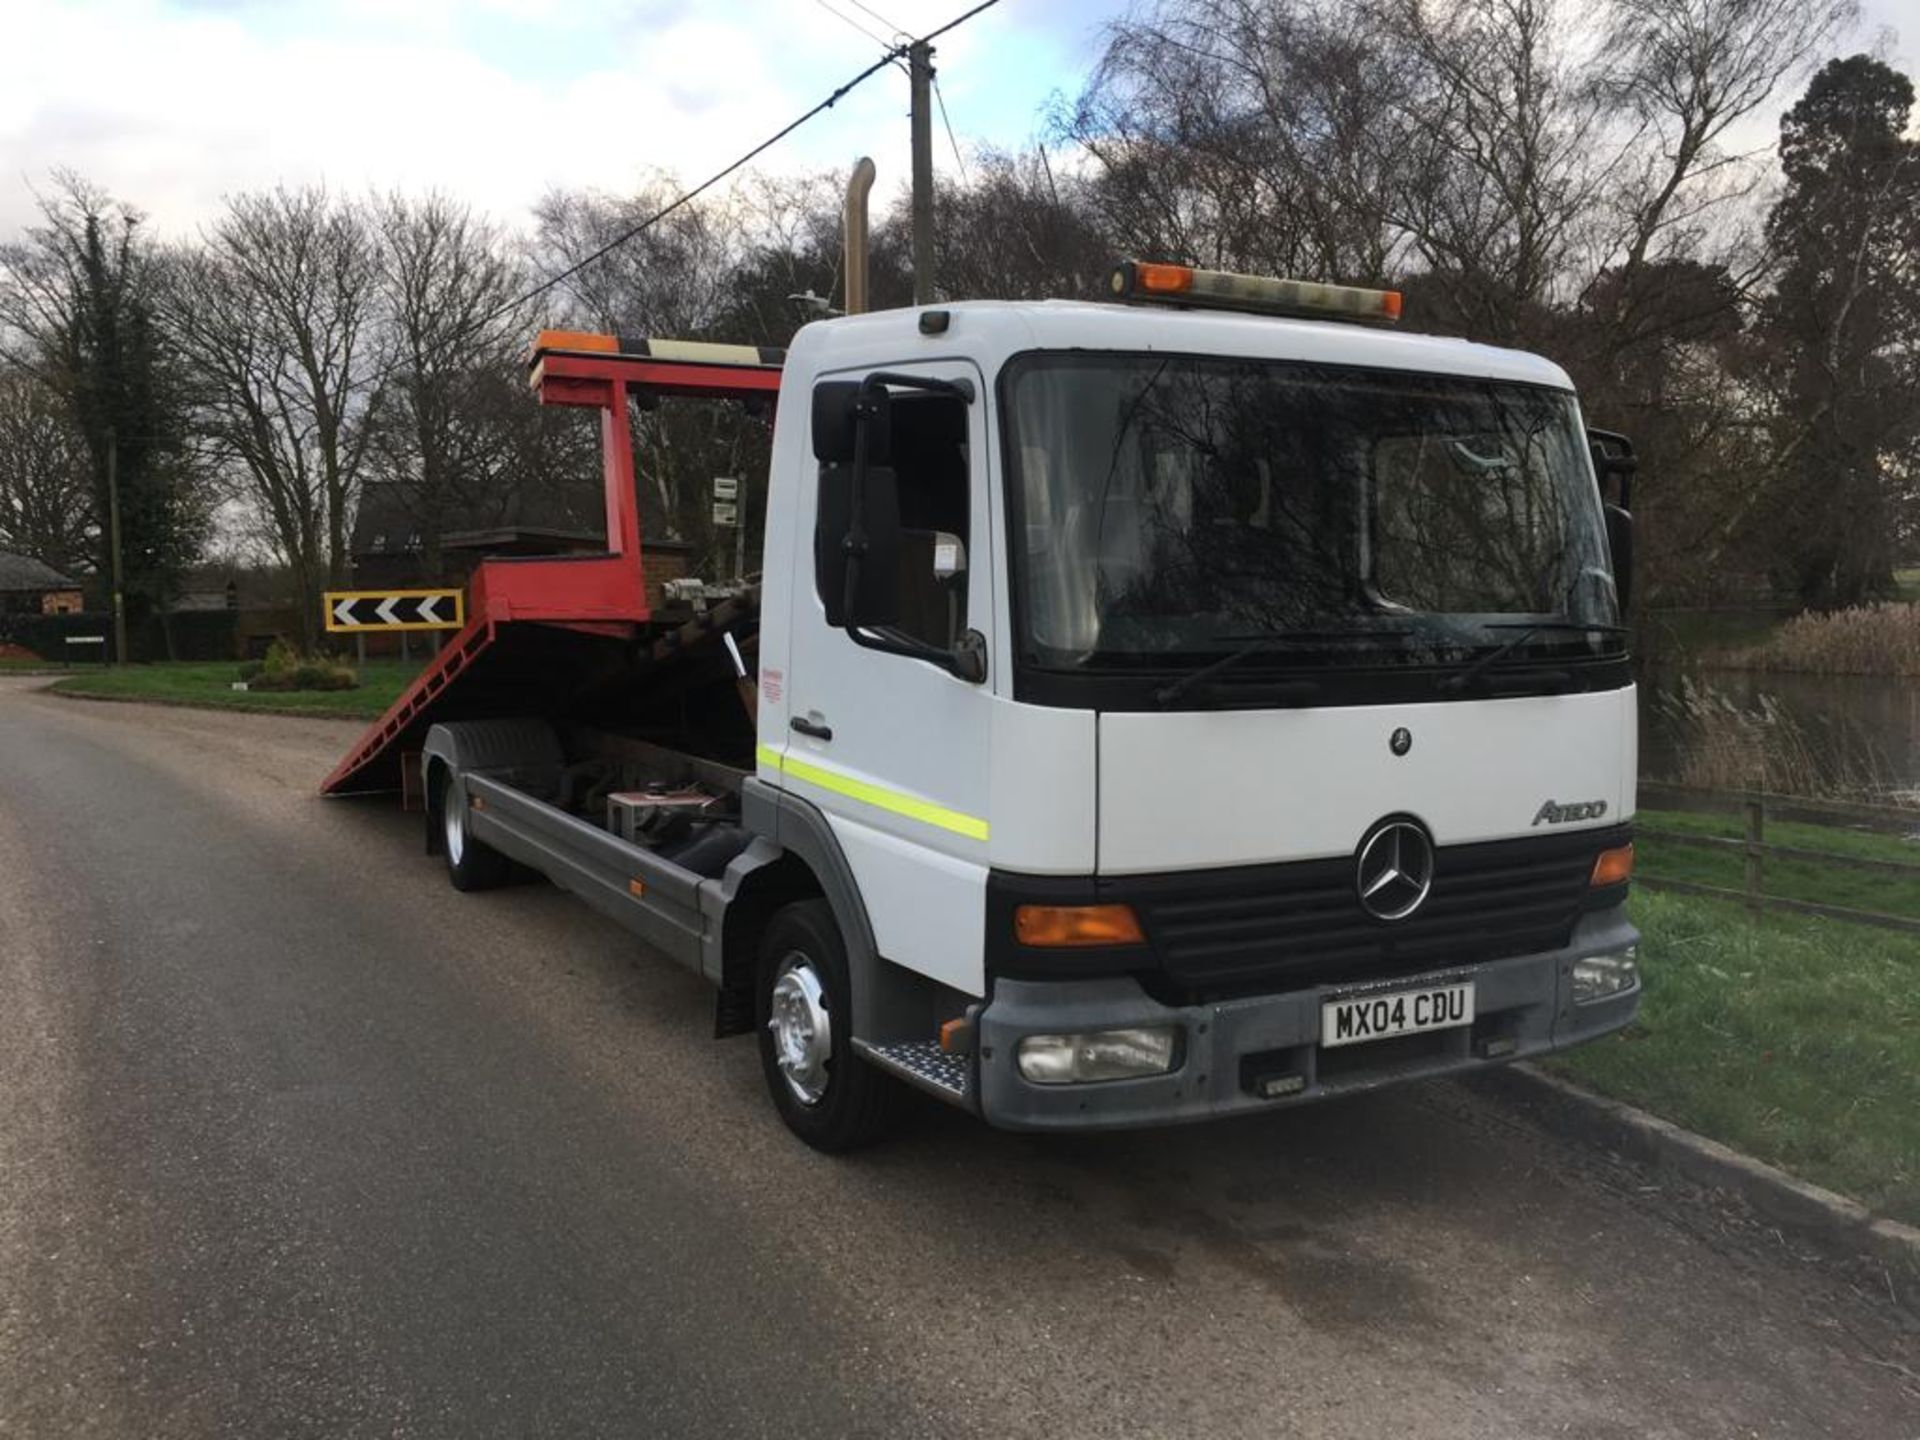 2004 MERCEDES BENZ ATEGO TRANSPORTER RECOVERY TRUCK - Image 2 of 31